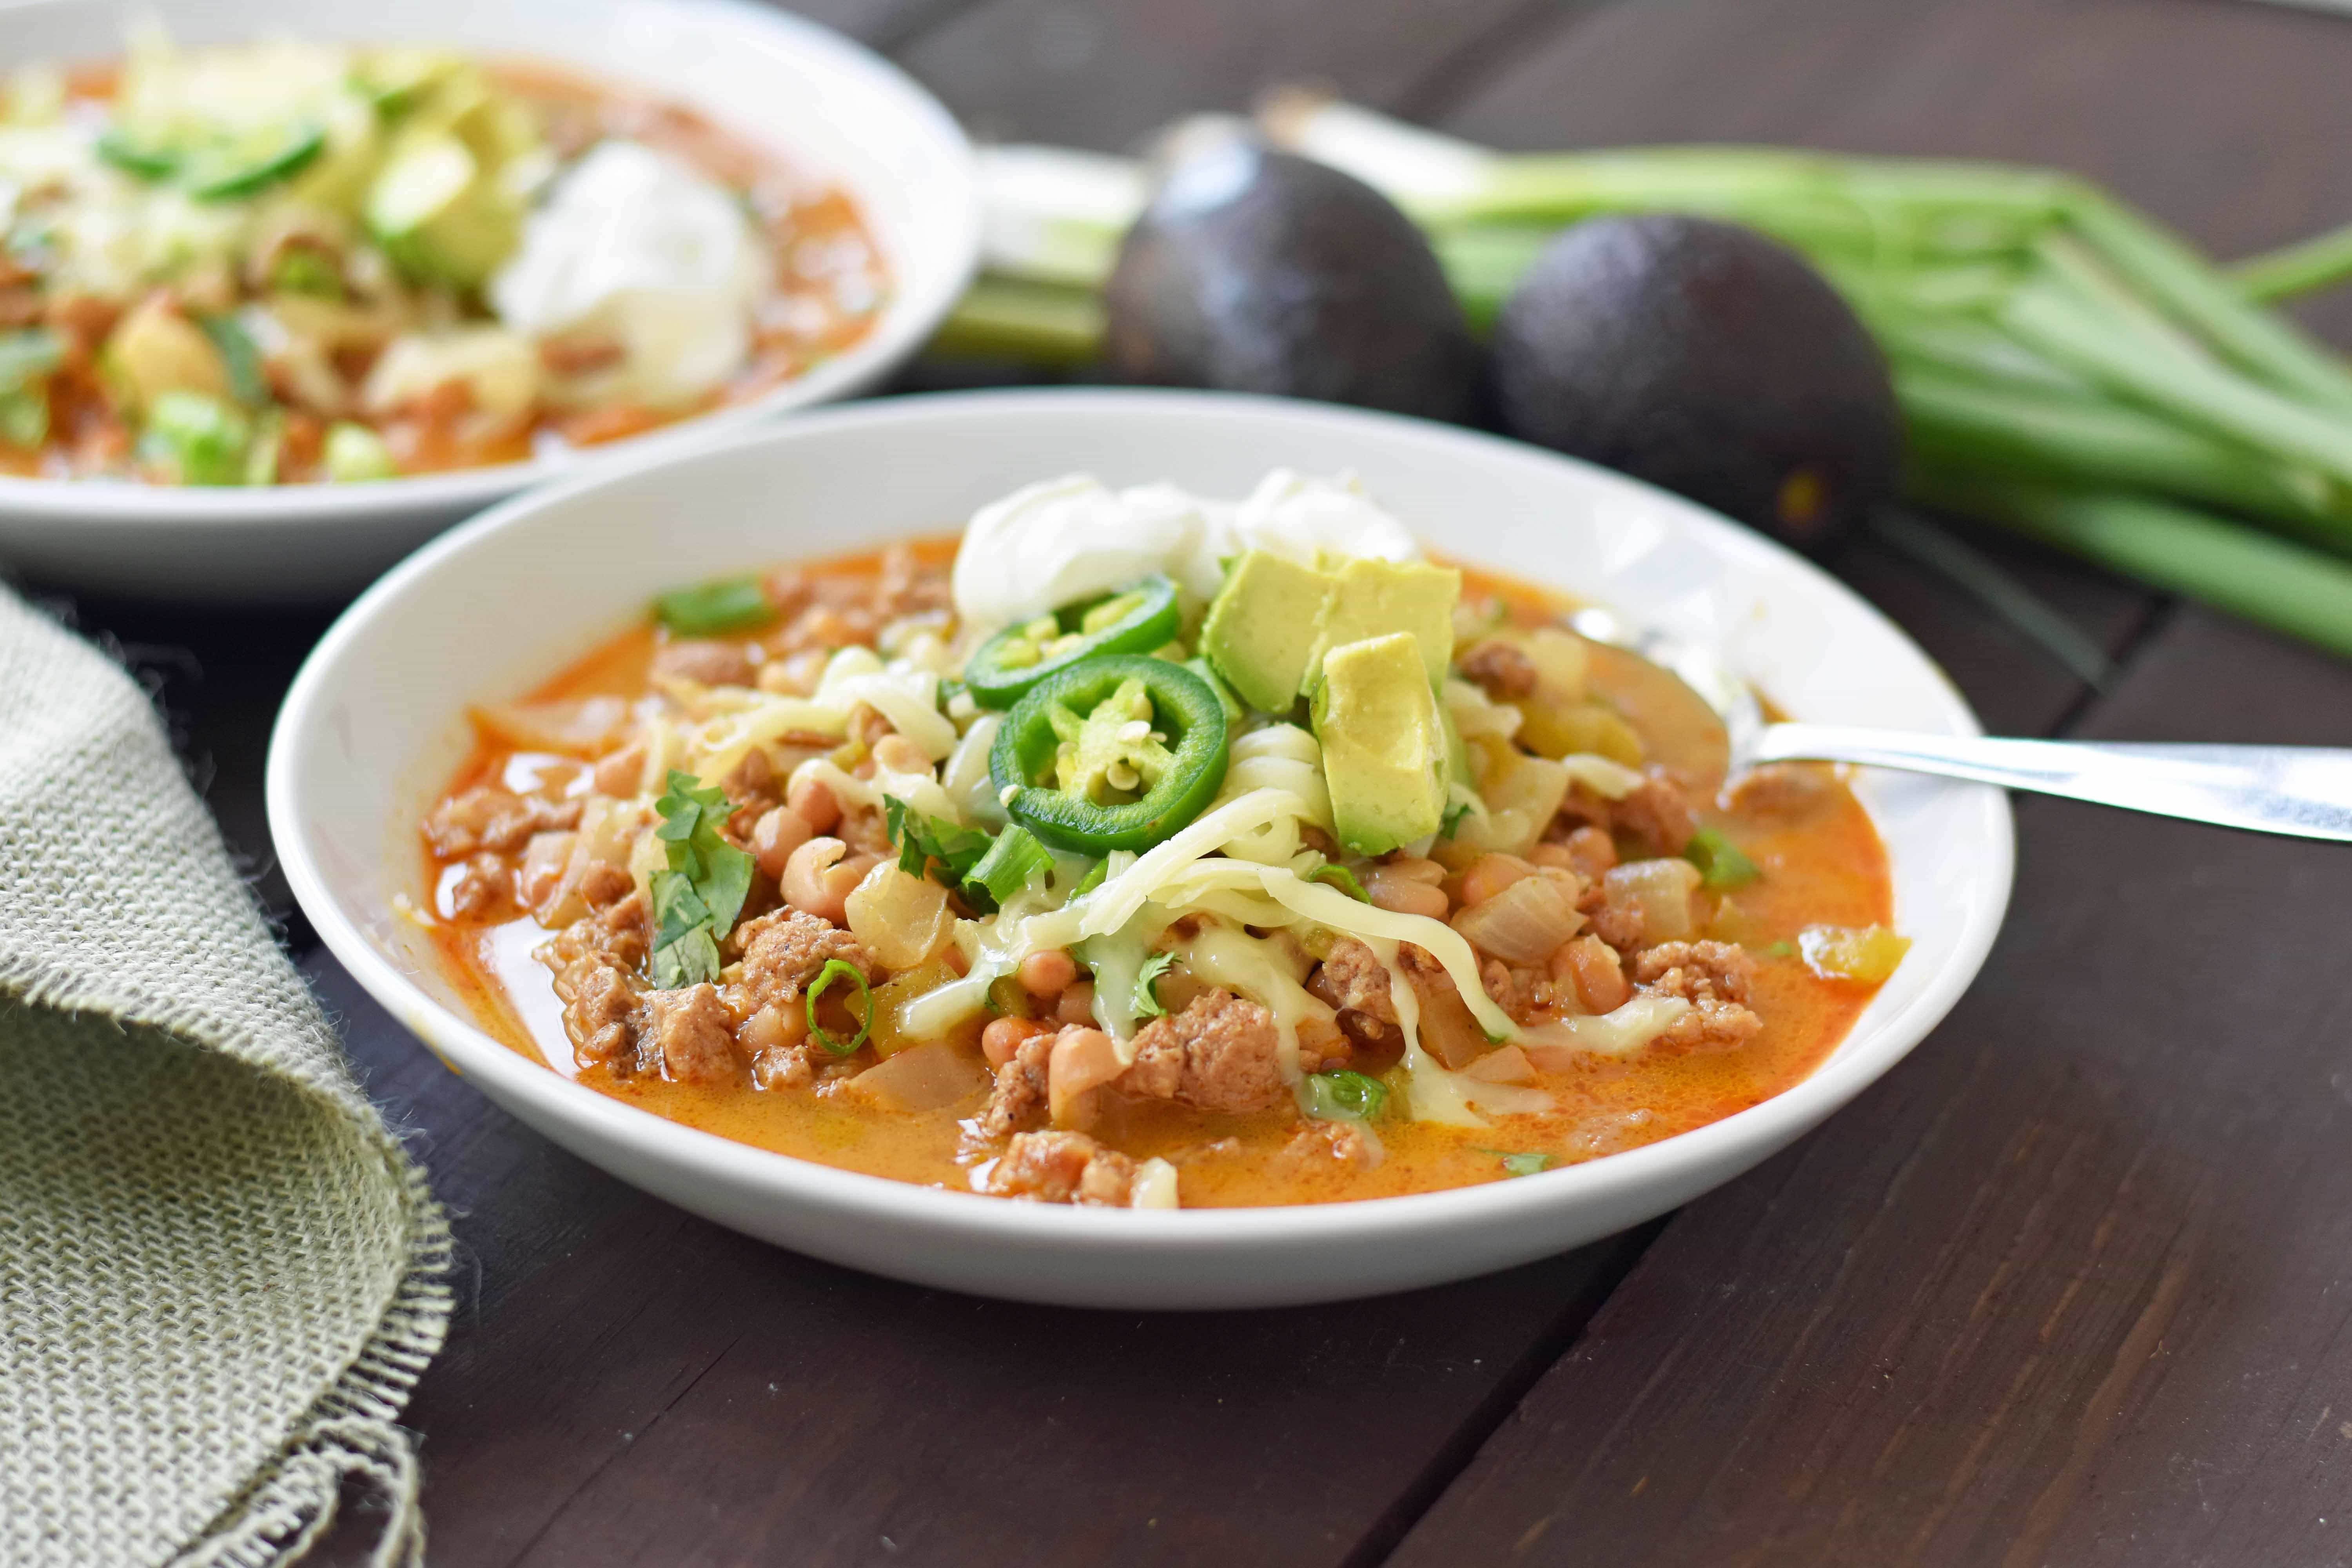 White Bean Turkey Chili is a healthy, nutritious soup made with lean protein, vegetables, and broth. Flavorful and delicious chili made in less than 30 minutes. www.modernhoney.com